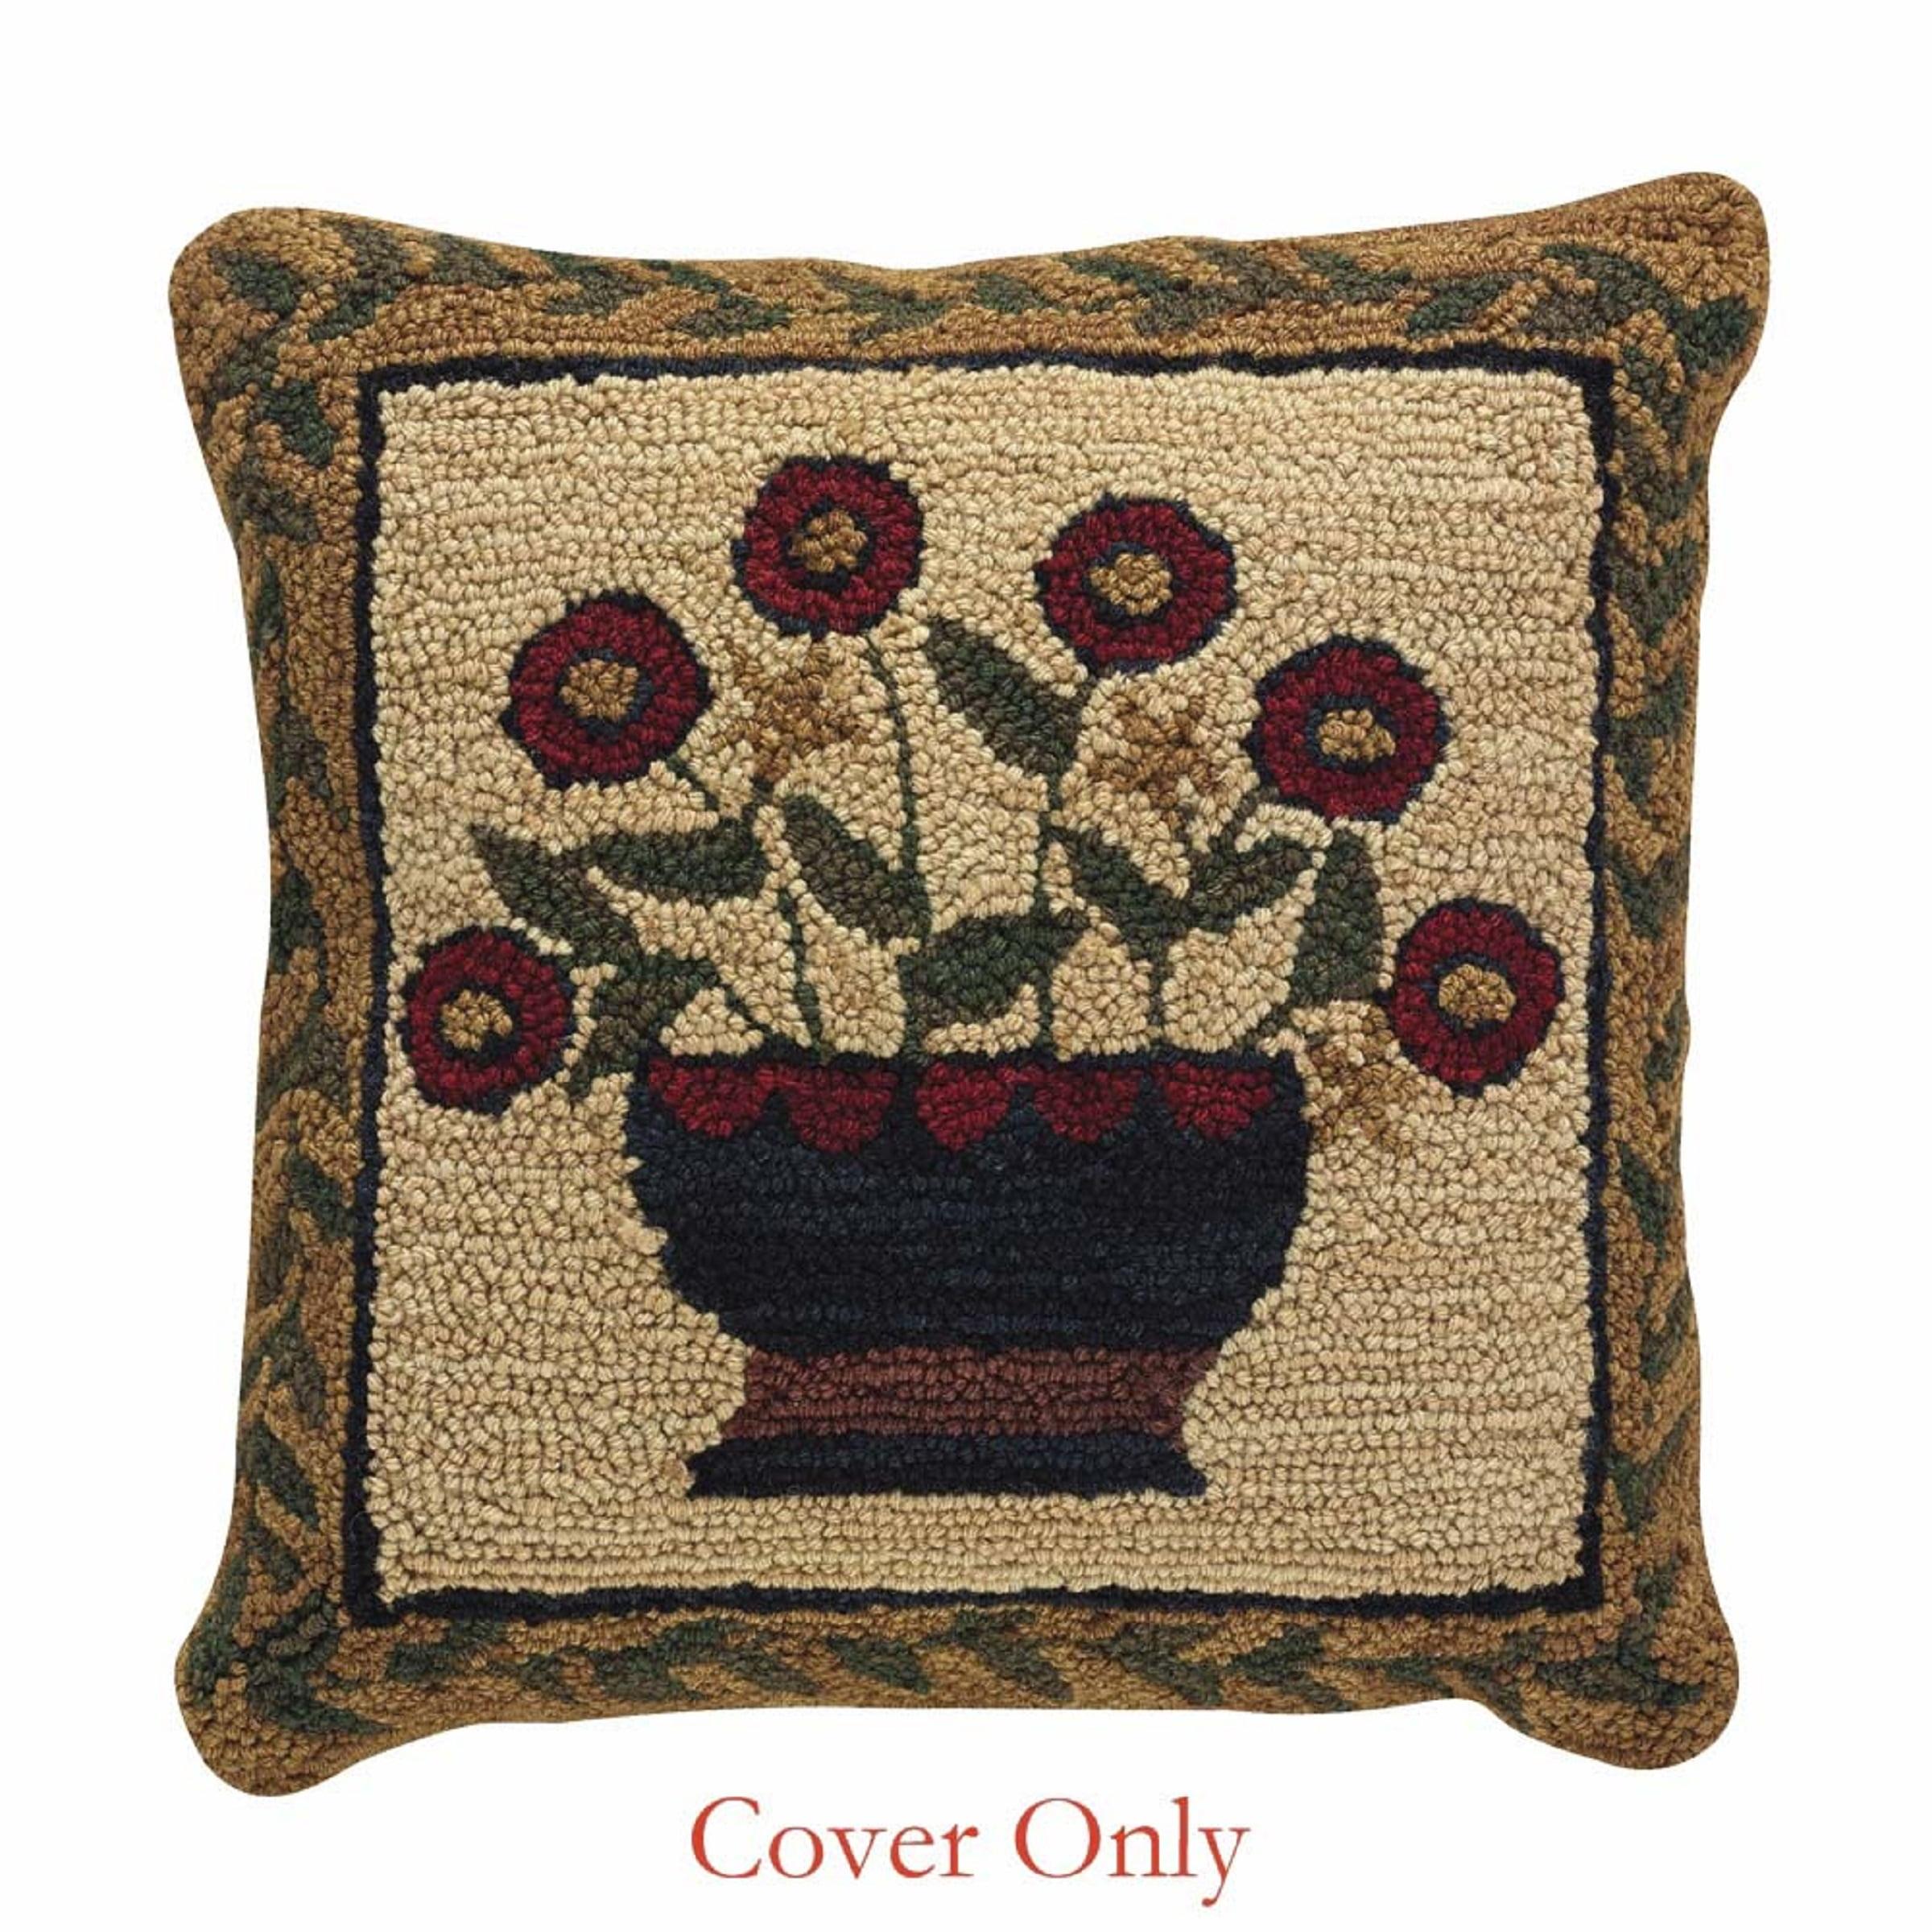 Floral Basket 14"x16" Hand-Hooked Cotton-Polyester Pillow Cover